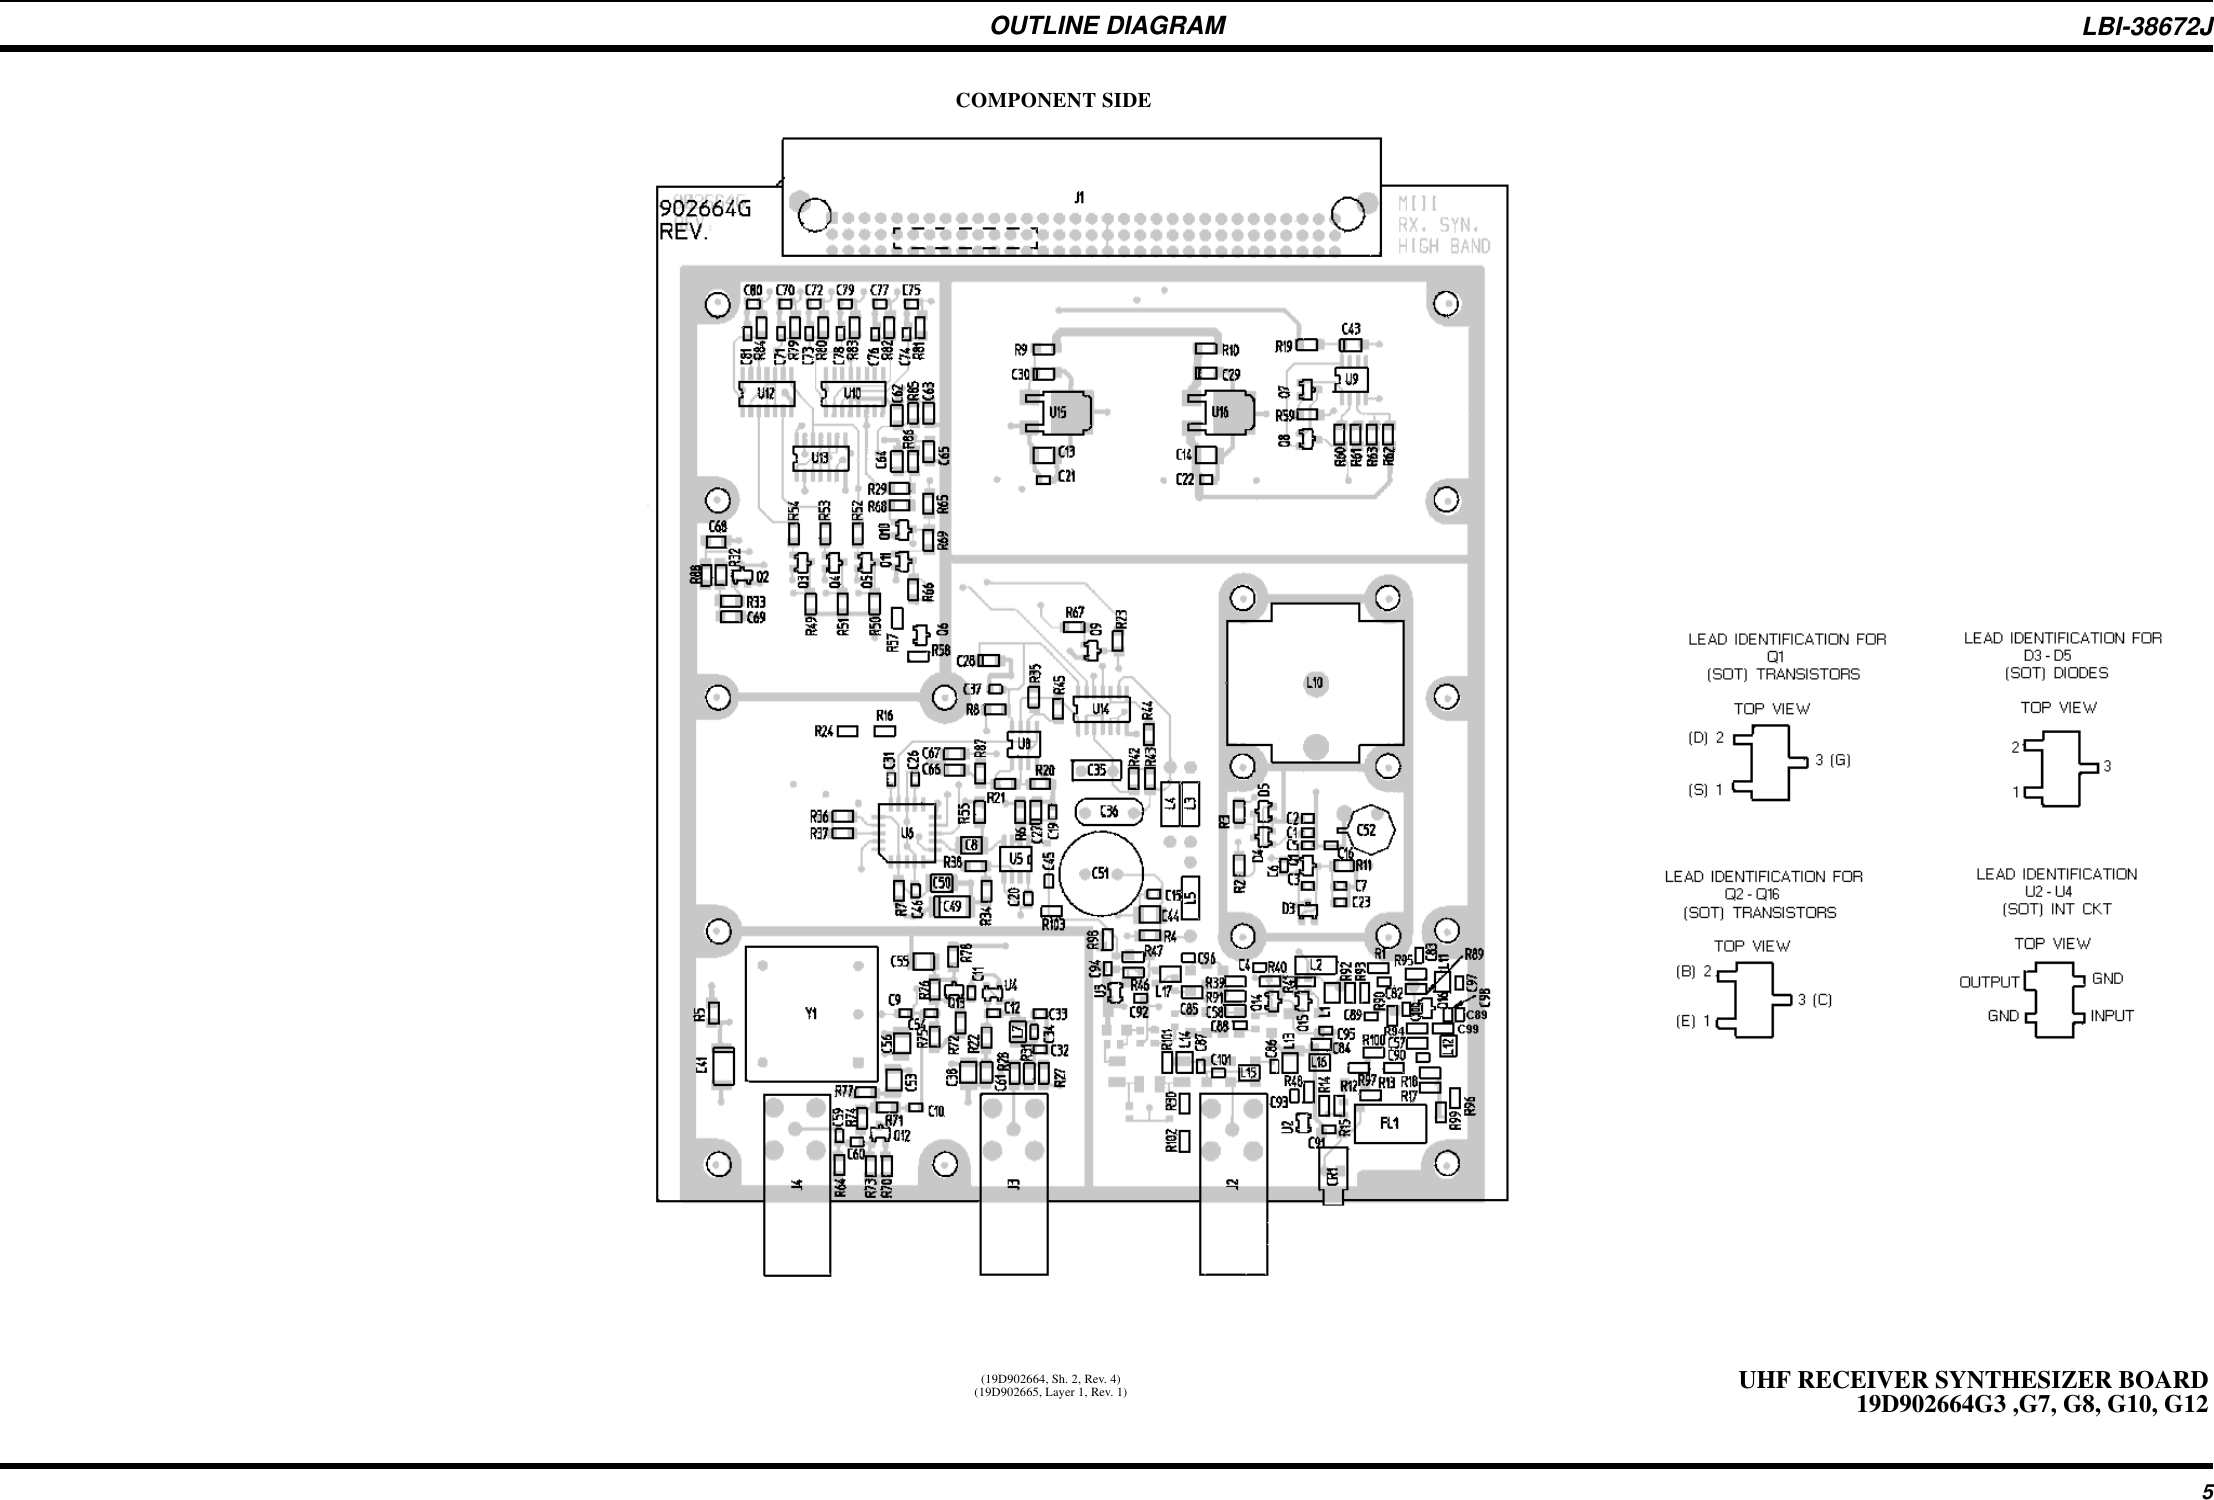 OUTLINE DIAGRAMUHF RECEIVER SYNTHESIZER BOARD19D902664G3 ,G7, G8, G10, G12COMPONENT SIDE(19D902664, Sh. 2, Rev. 4)(19D902665, Layer 1, Rev. 1)LBI-38672J5